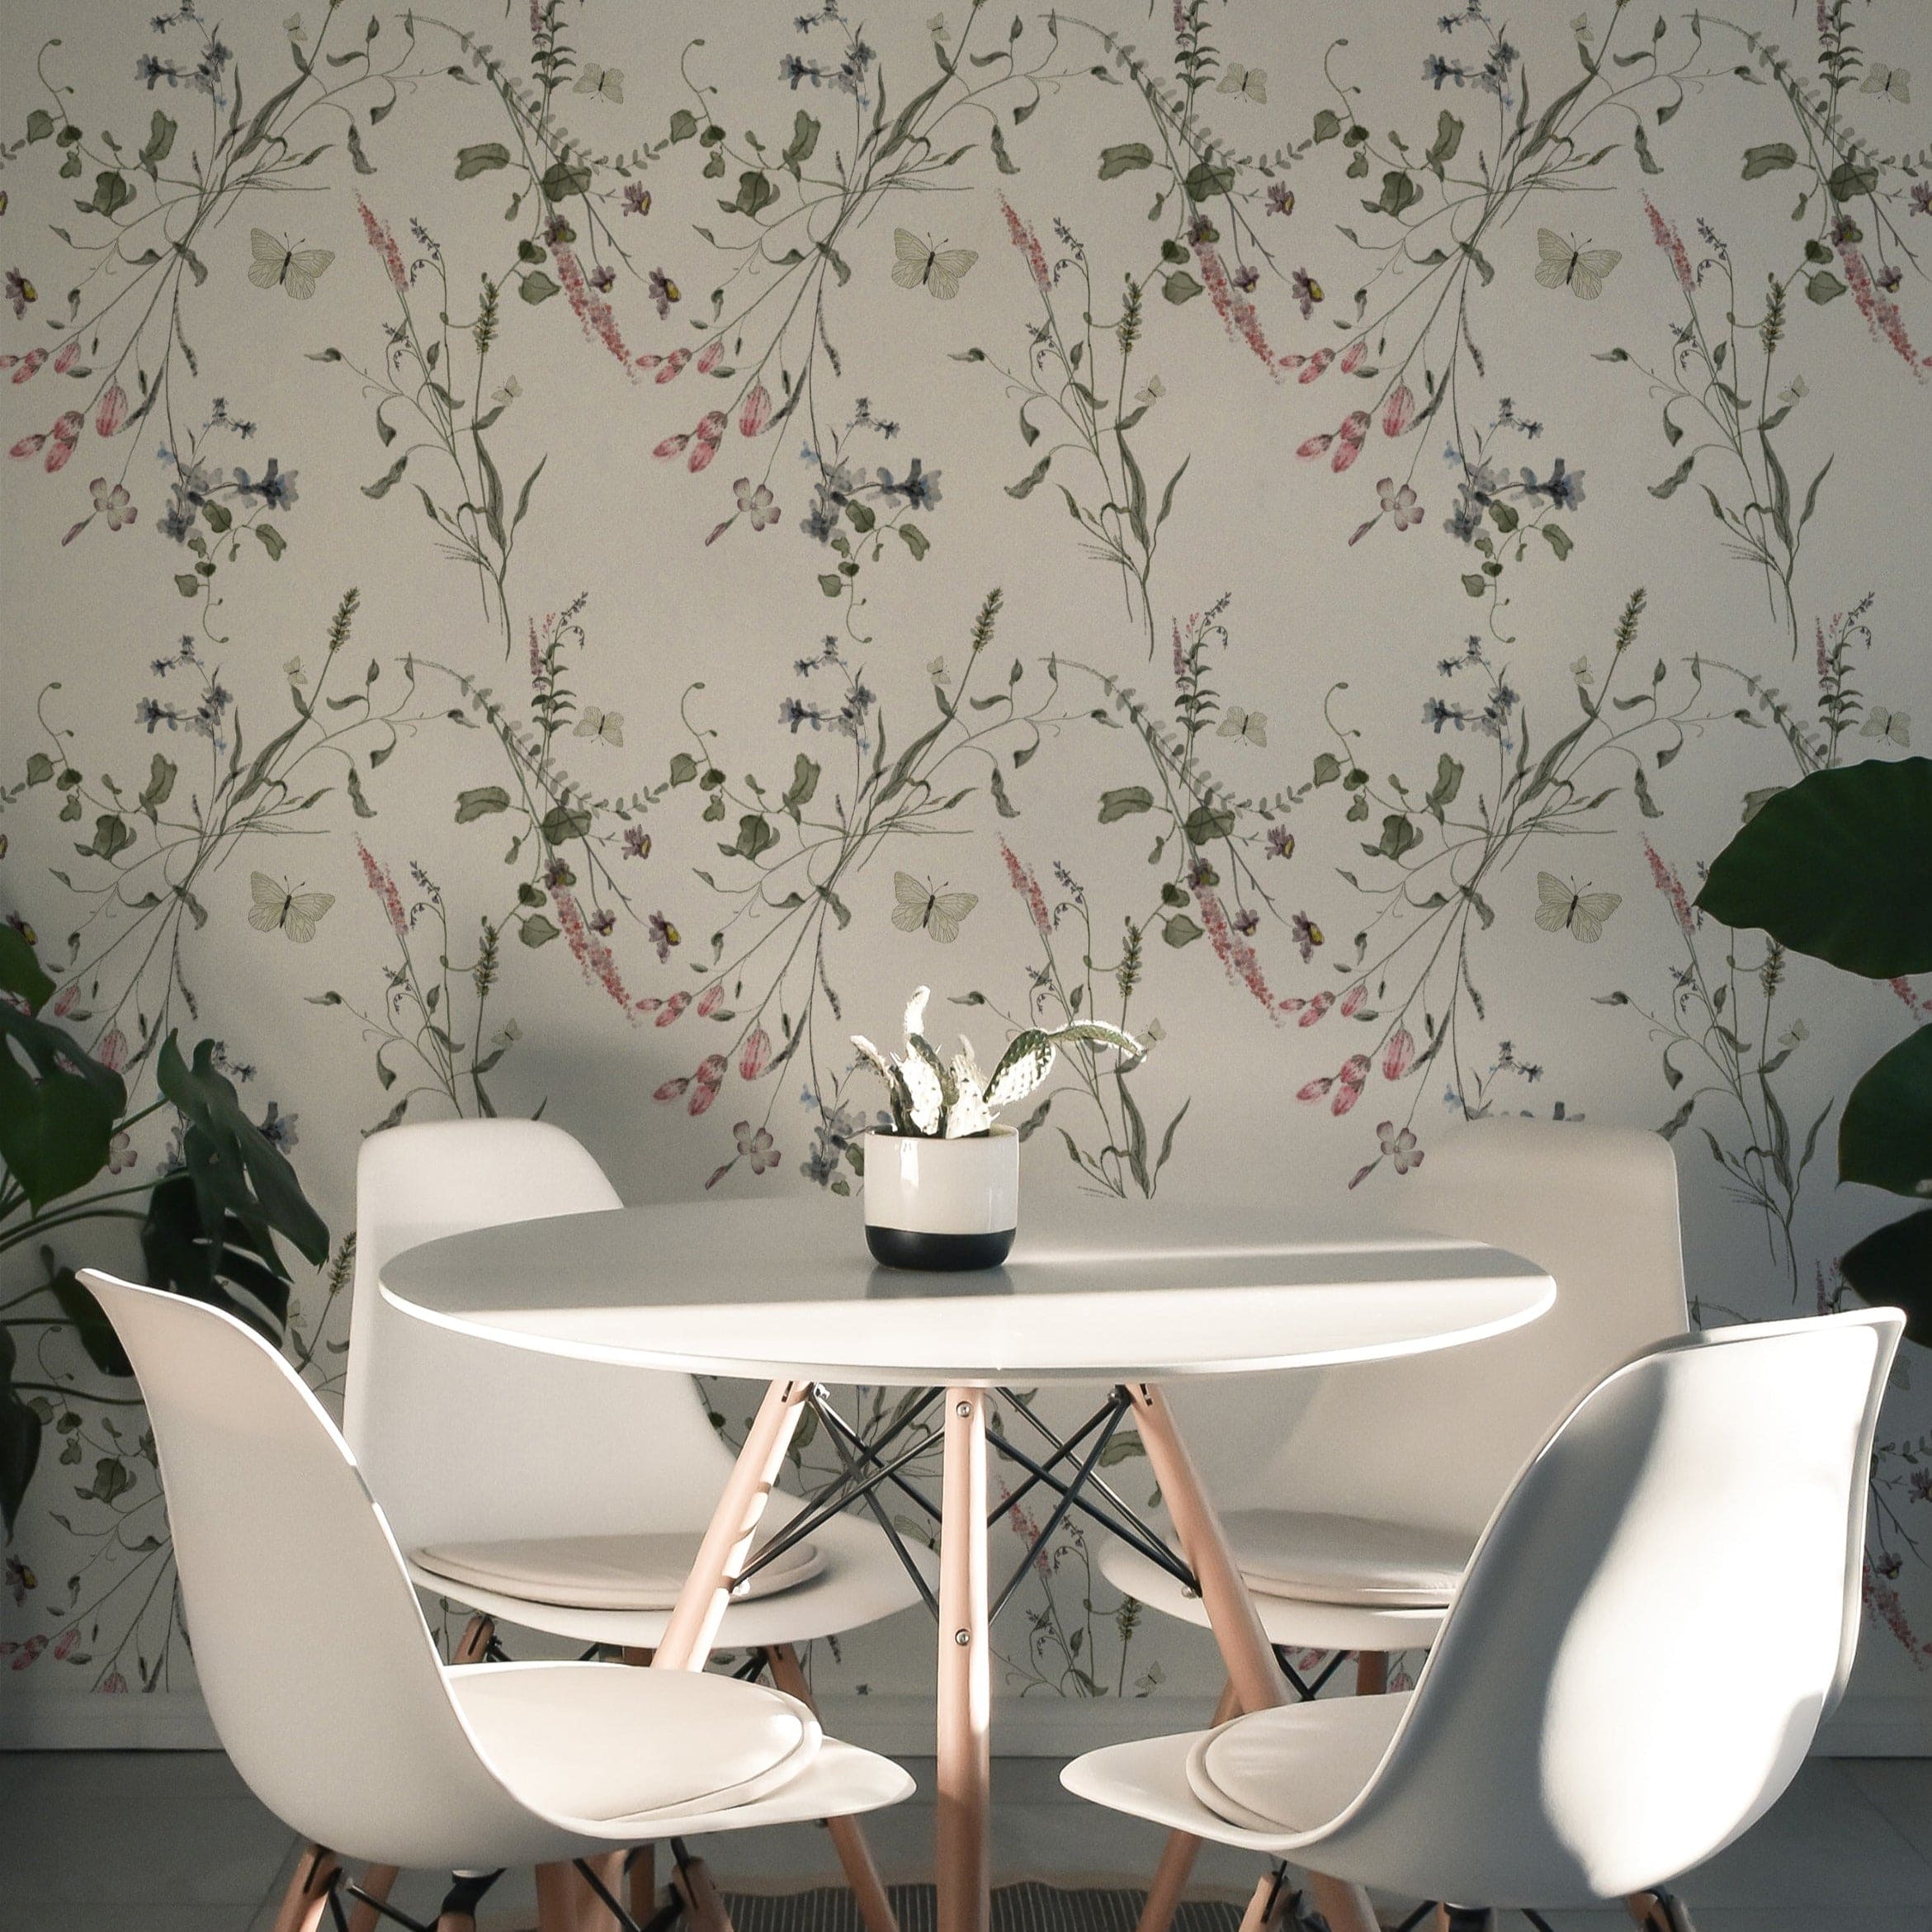 A modern dining area adorned with the Lovely Botanicals Wallpaper, which brings a fresh, natural vibe to the space. The light floral patterns provide a soft background for the sleek white table and chairs, enhancing the room’s contemporary aesthetic.